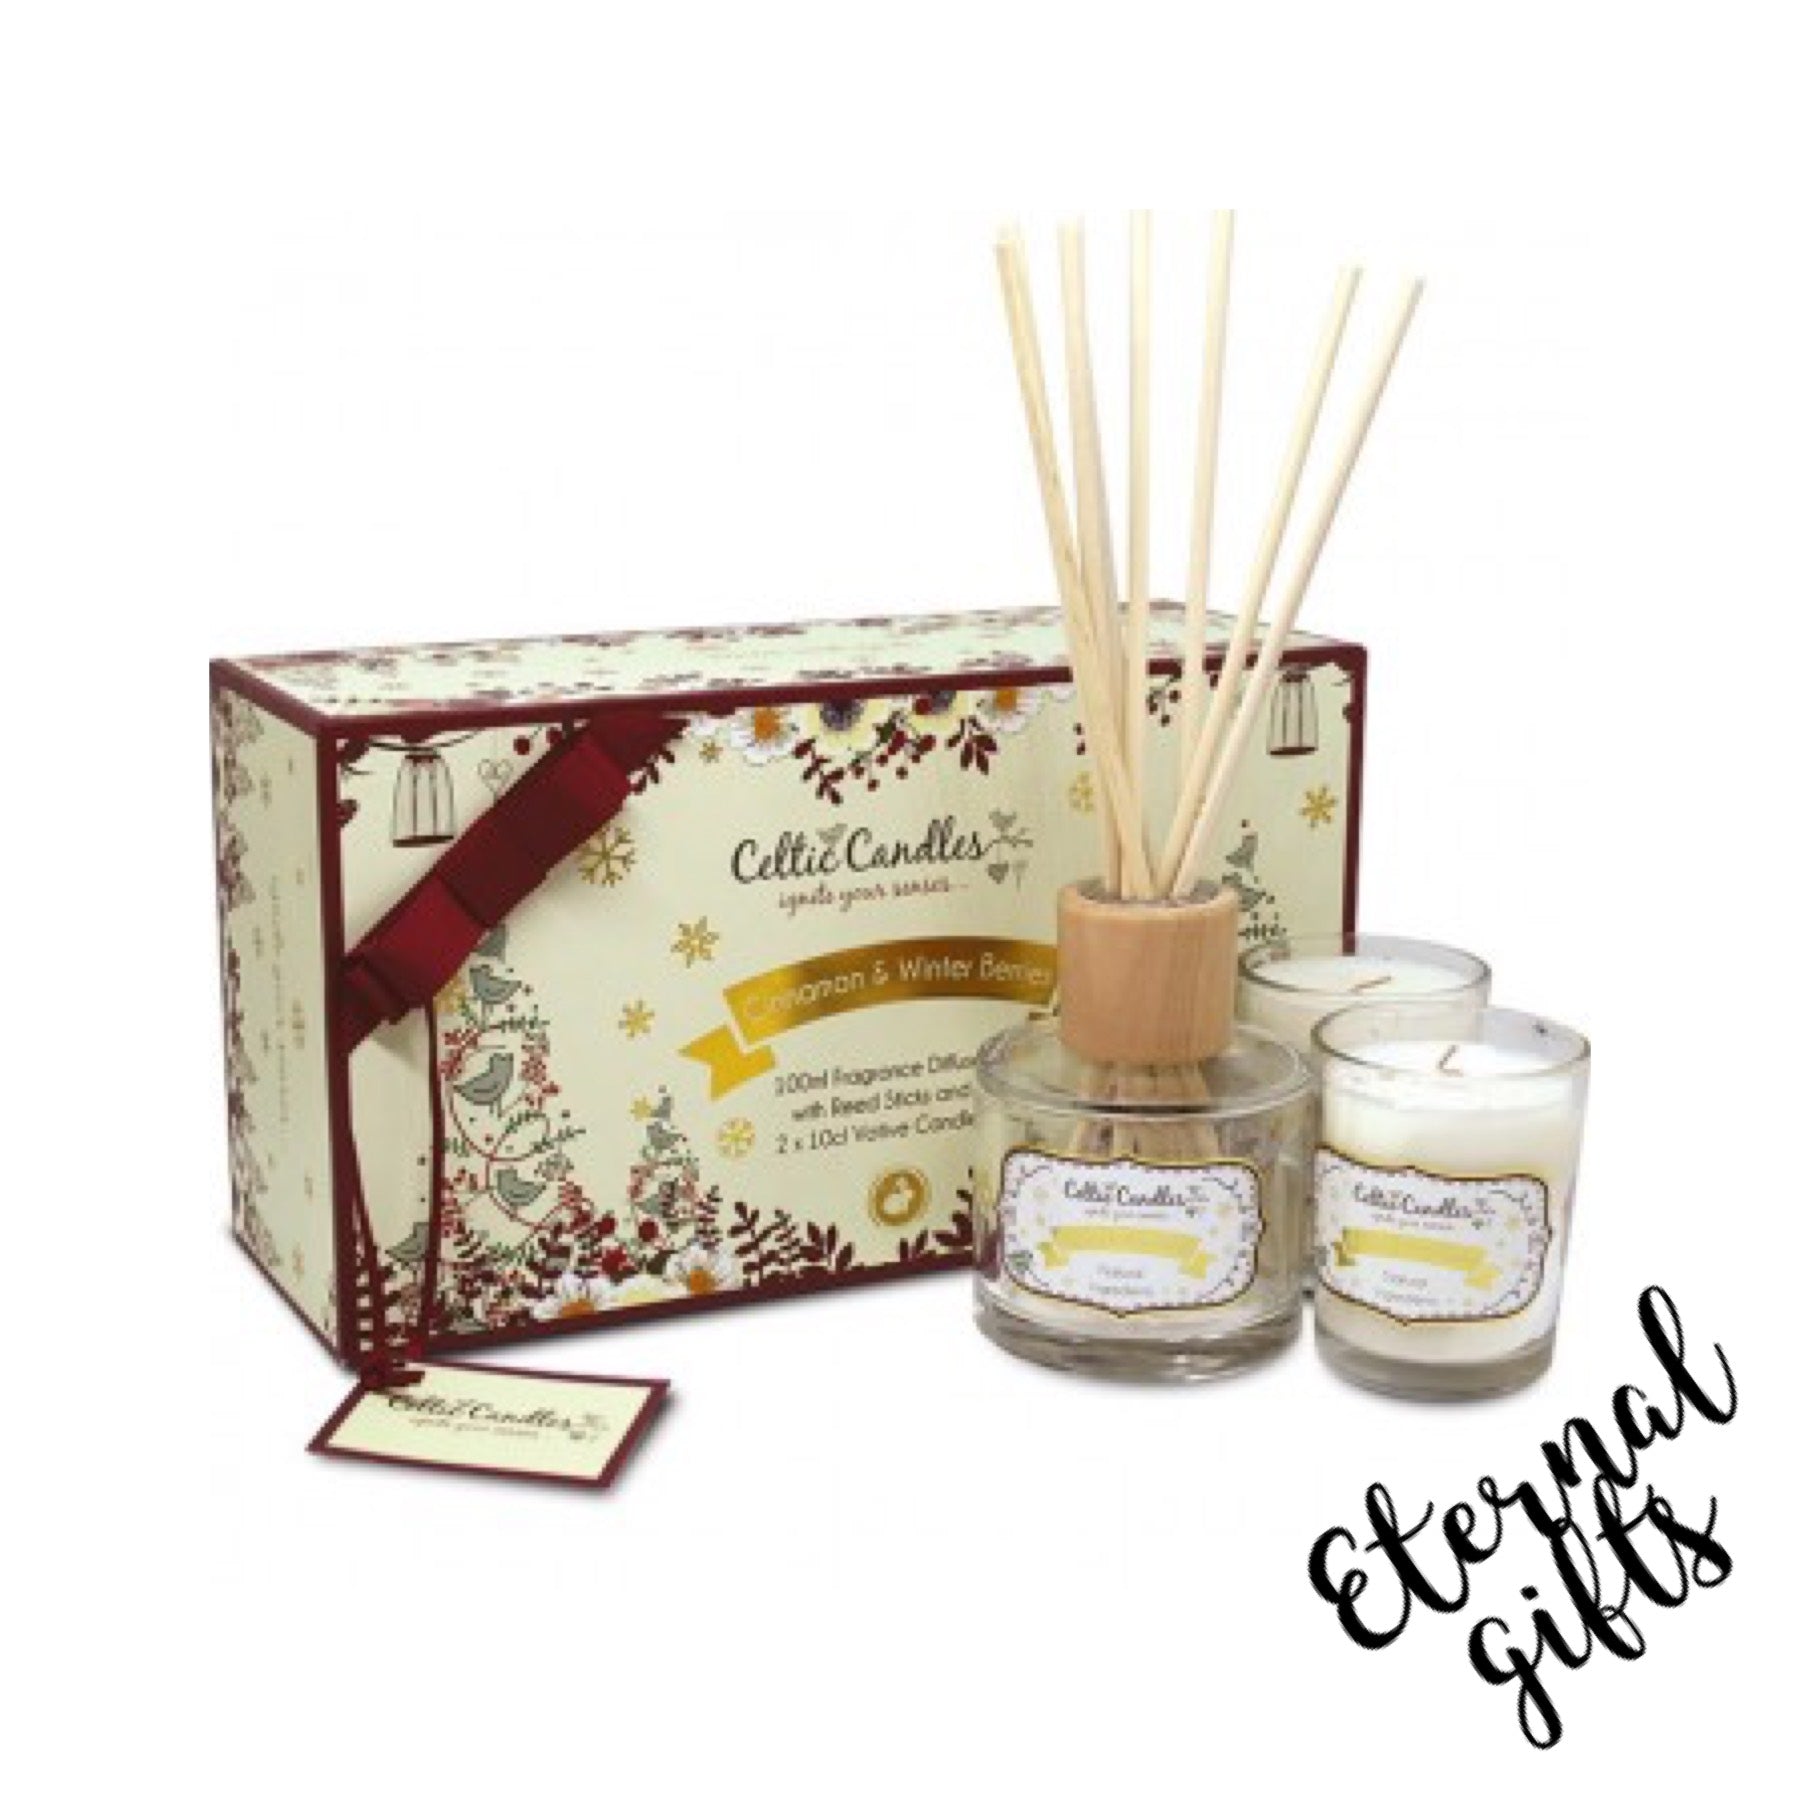 Cinnamon and Winter Berries Classic Gift Set from Celtic Candles